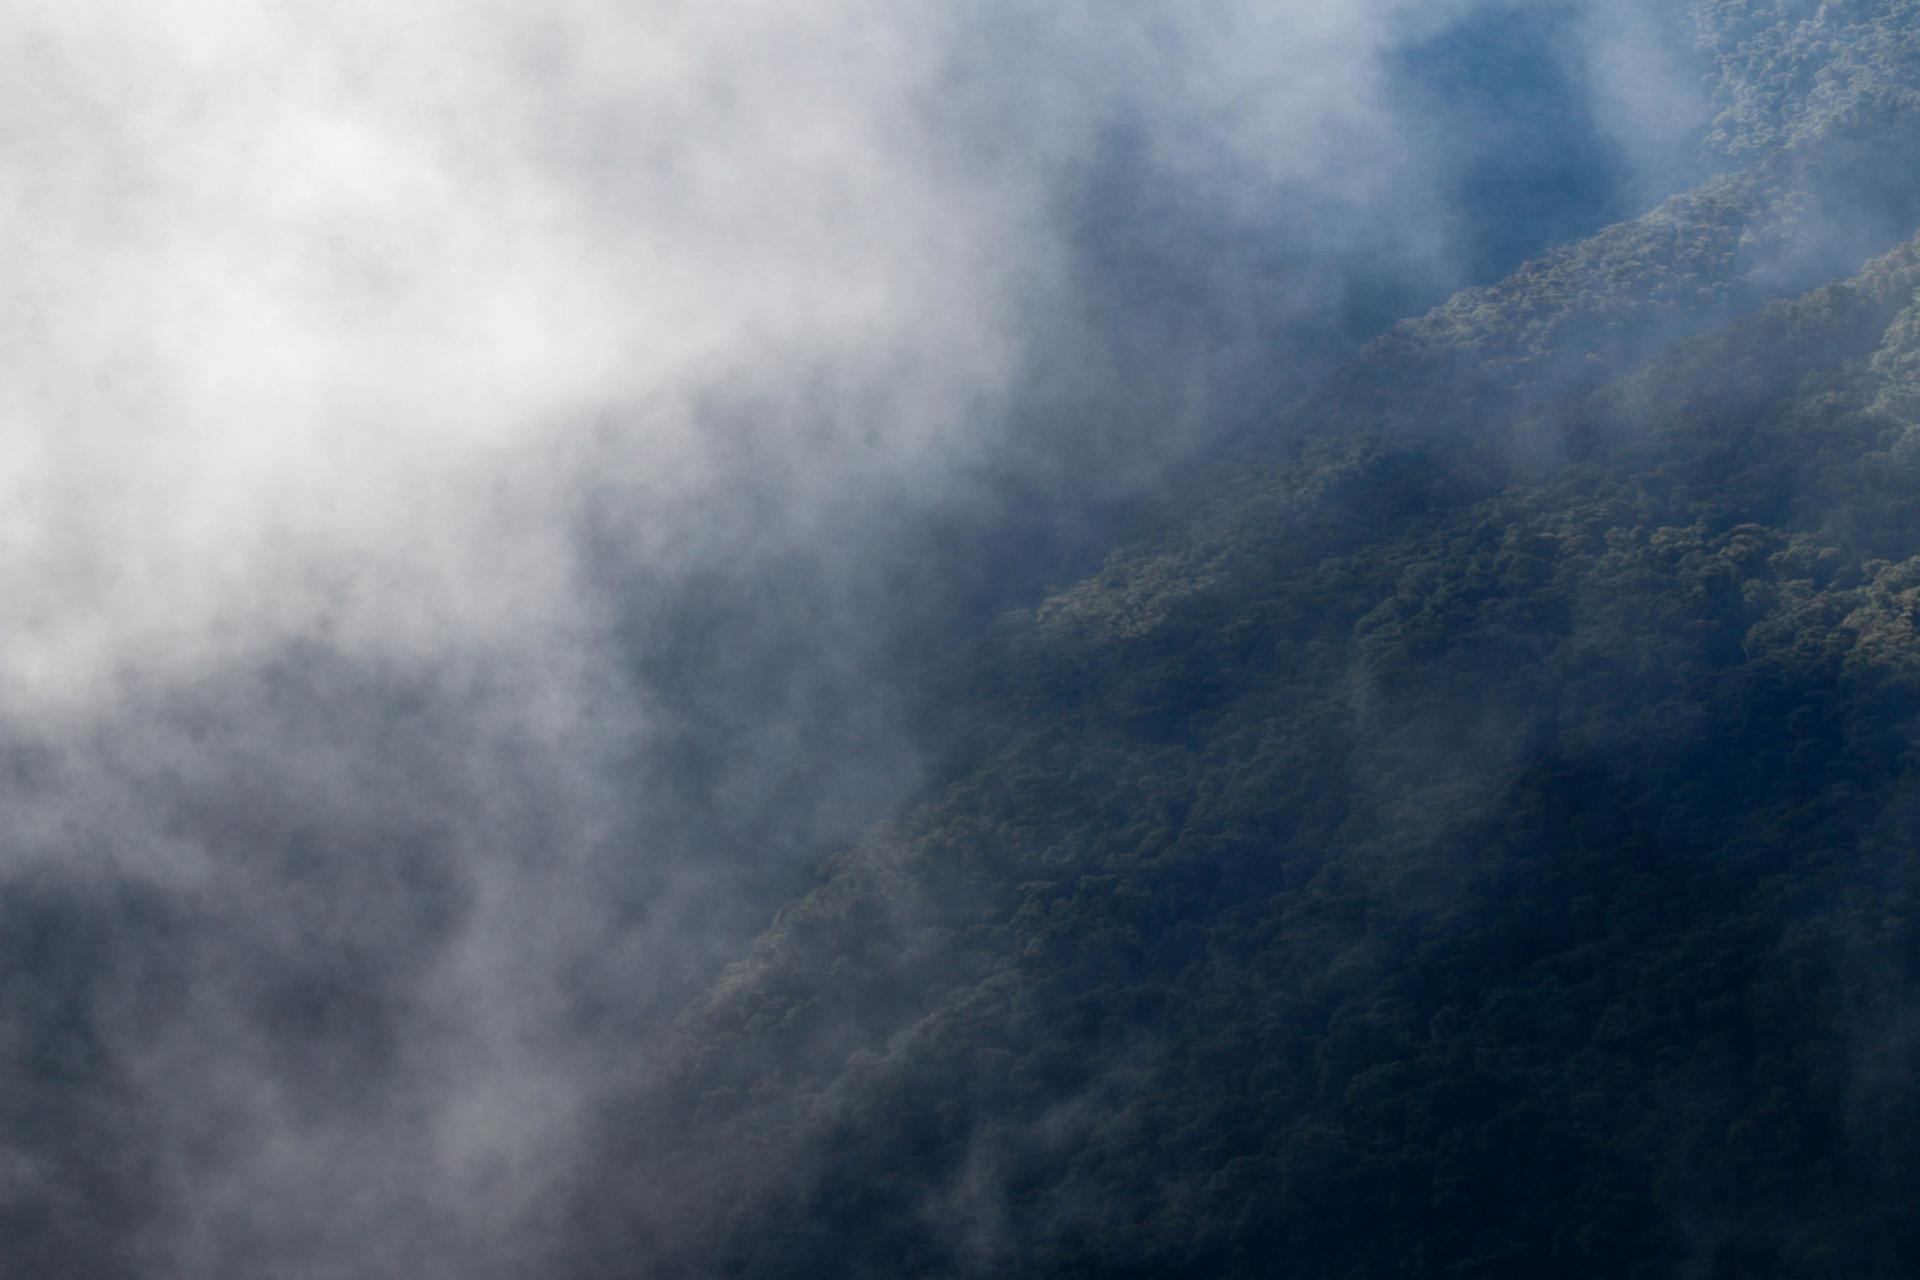 A photograph taken amongst the clouds in a cloud forest.